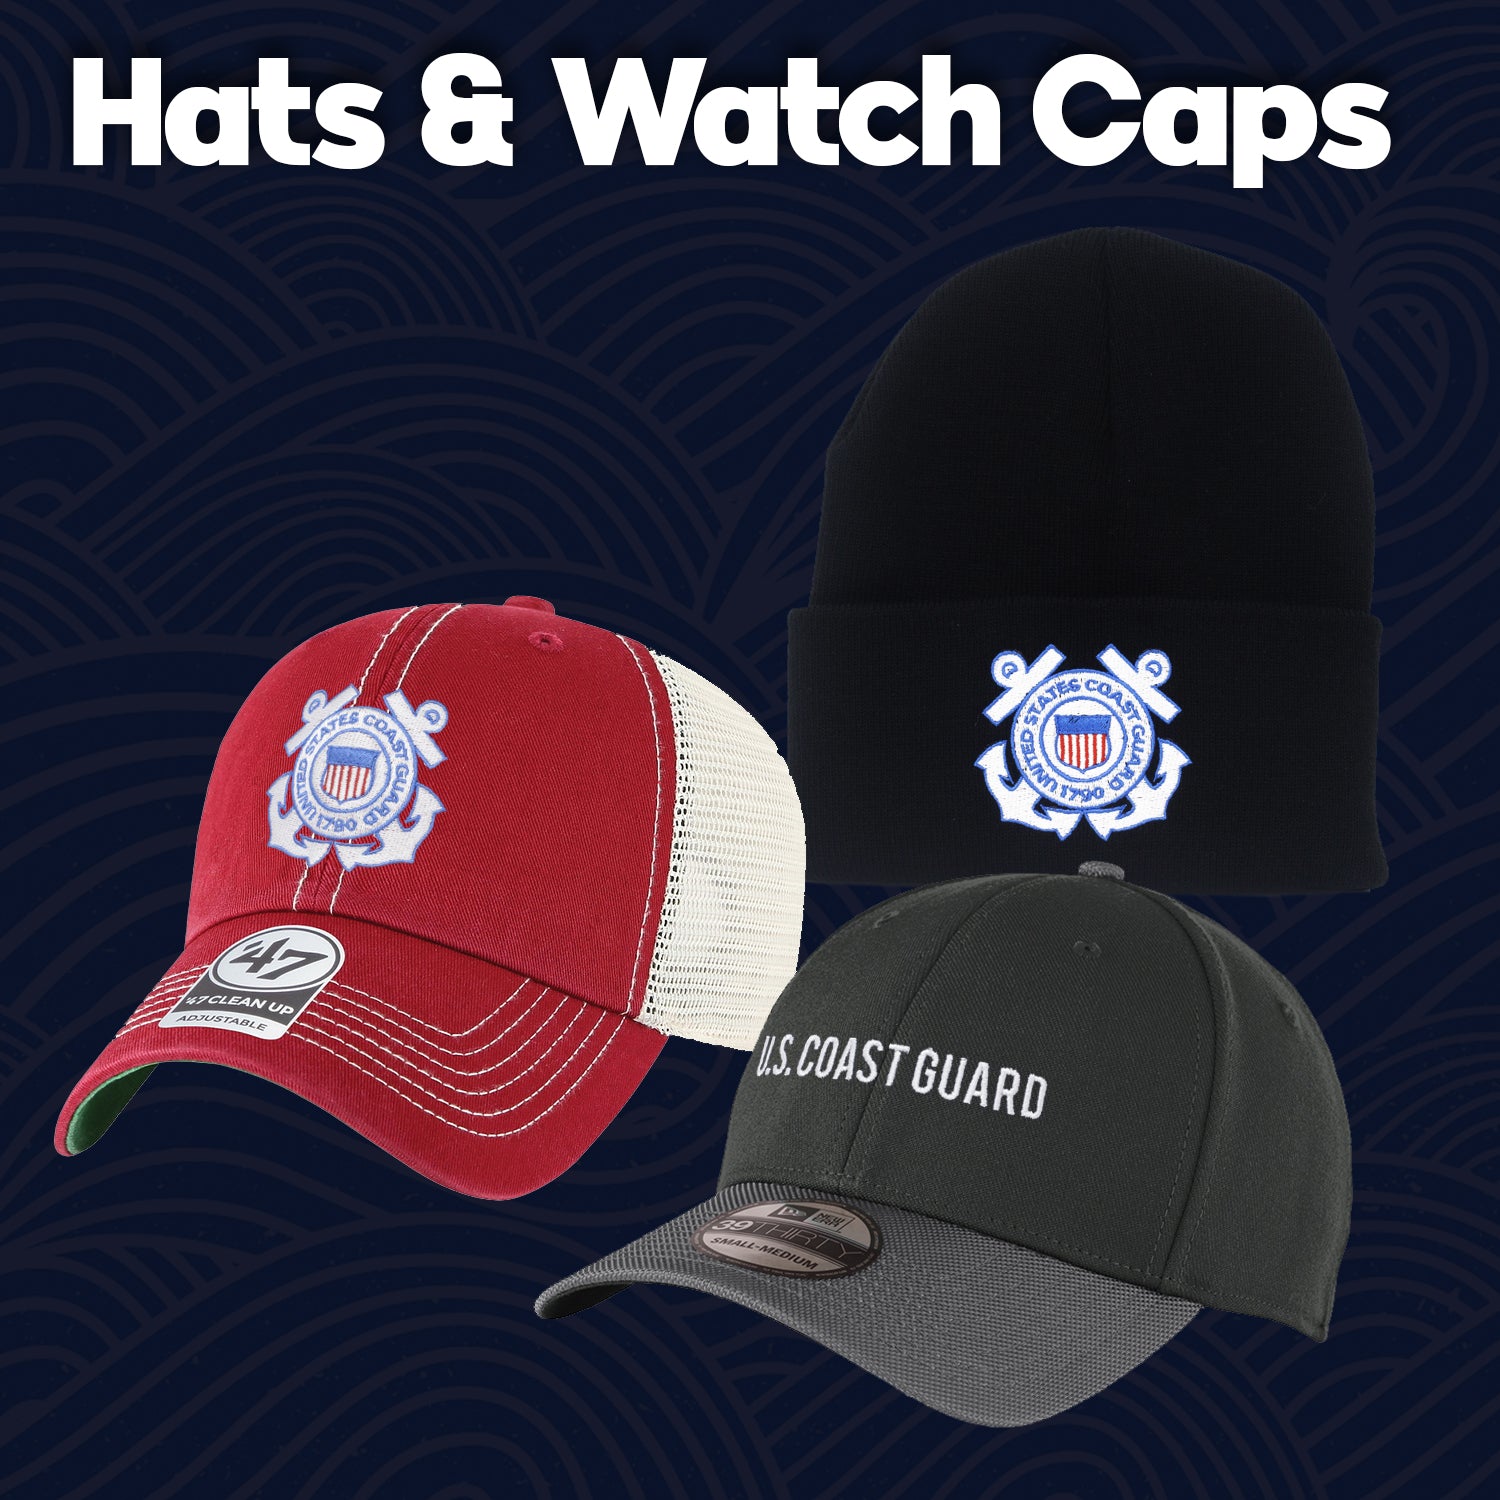 Hats and Watch Caps